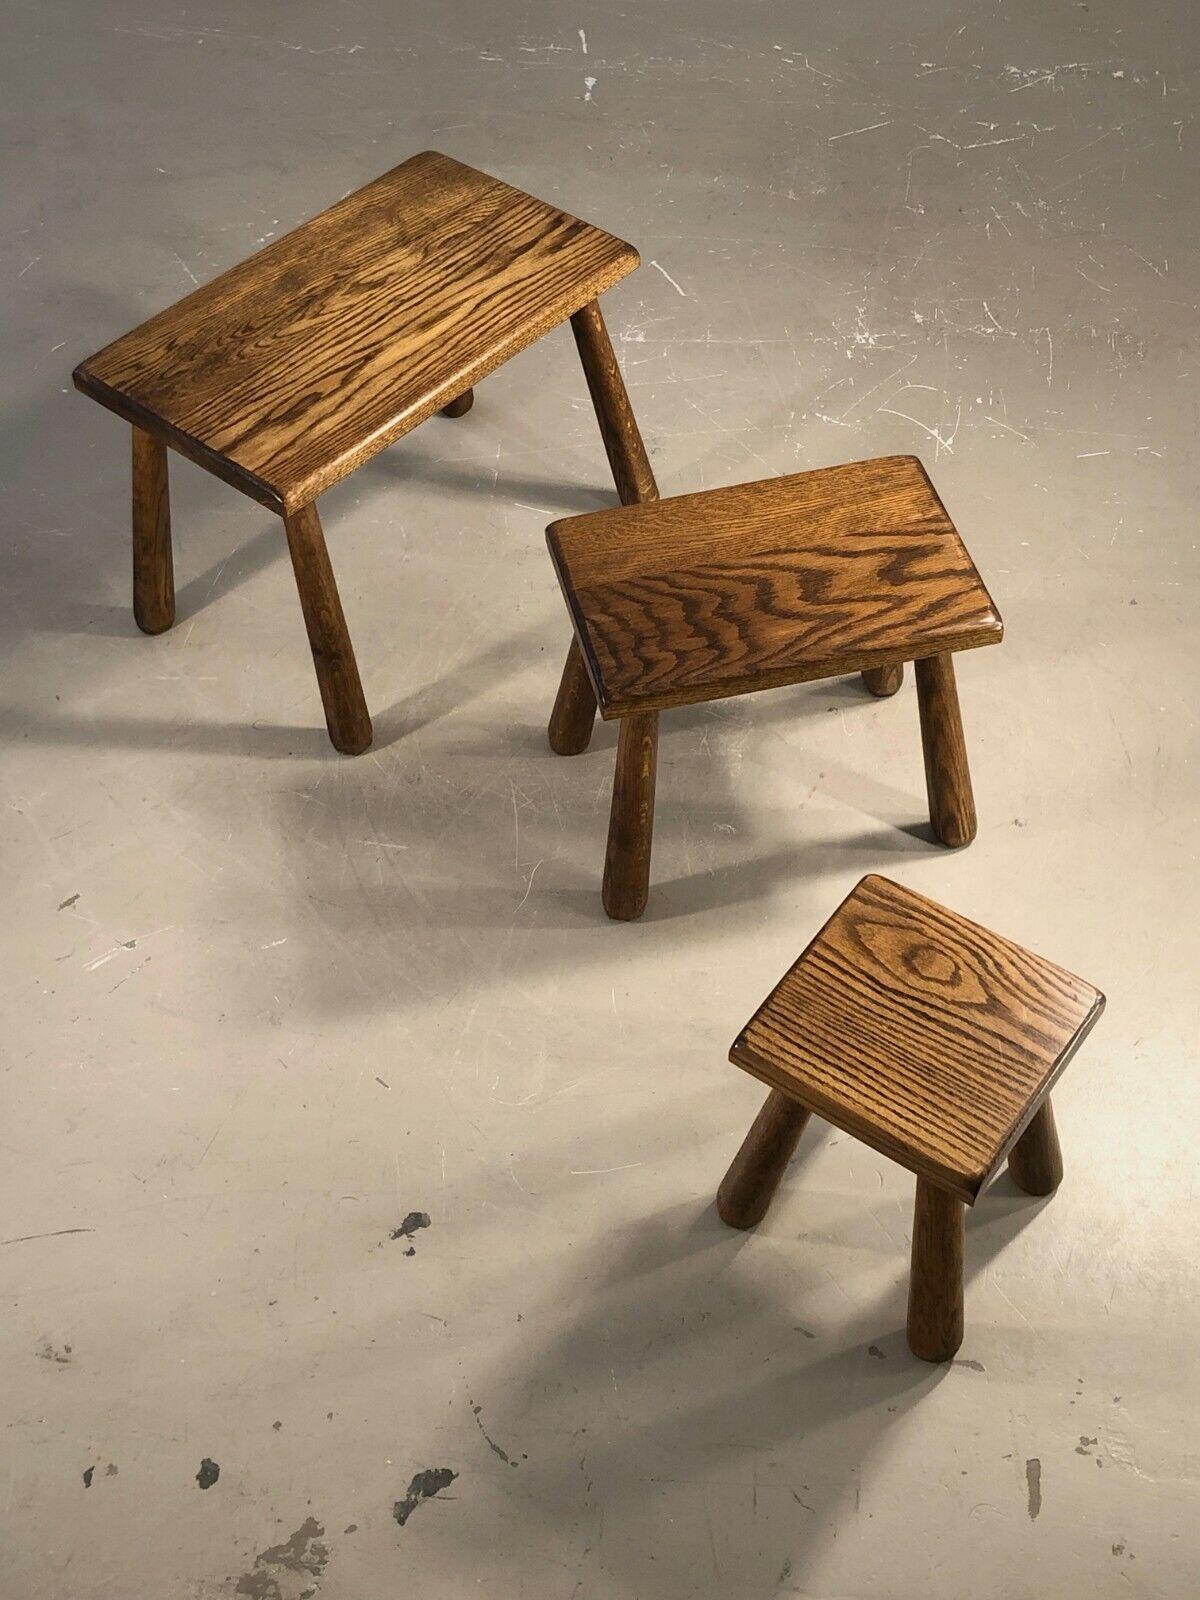 Rustic A Set of 3 BRUTALIST RUSTIC-MODERN Gigogne TABLES in MAROLLES Style, France 1950